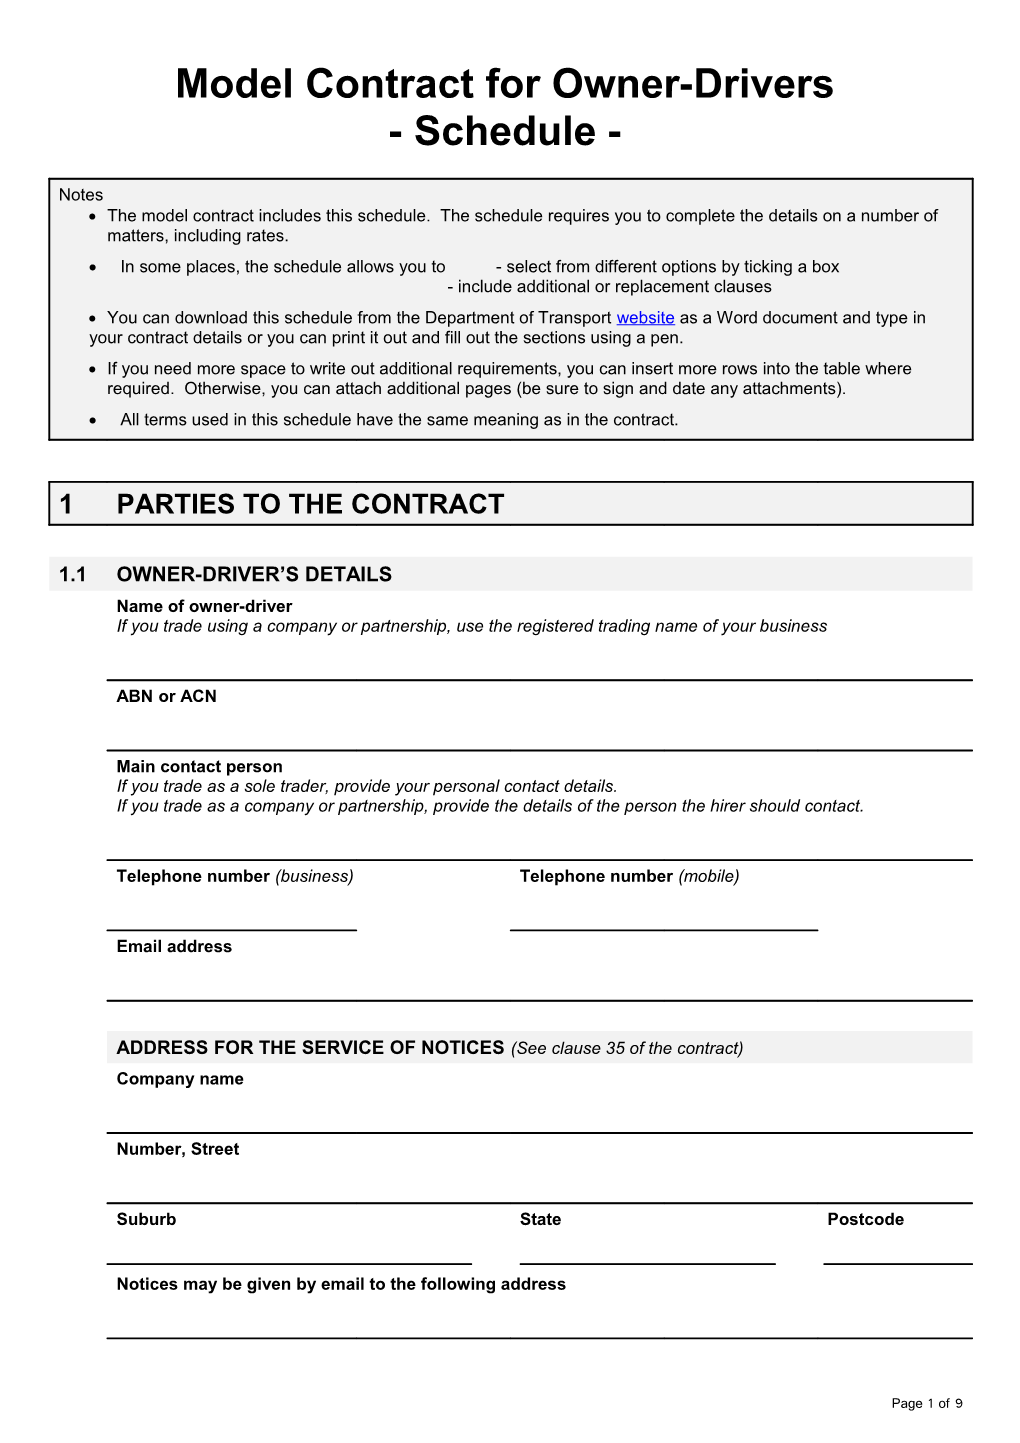 Model Contract for Owner-Drivers